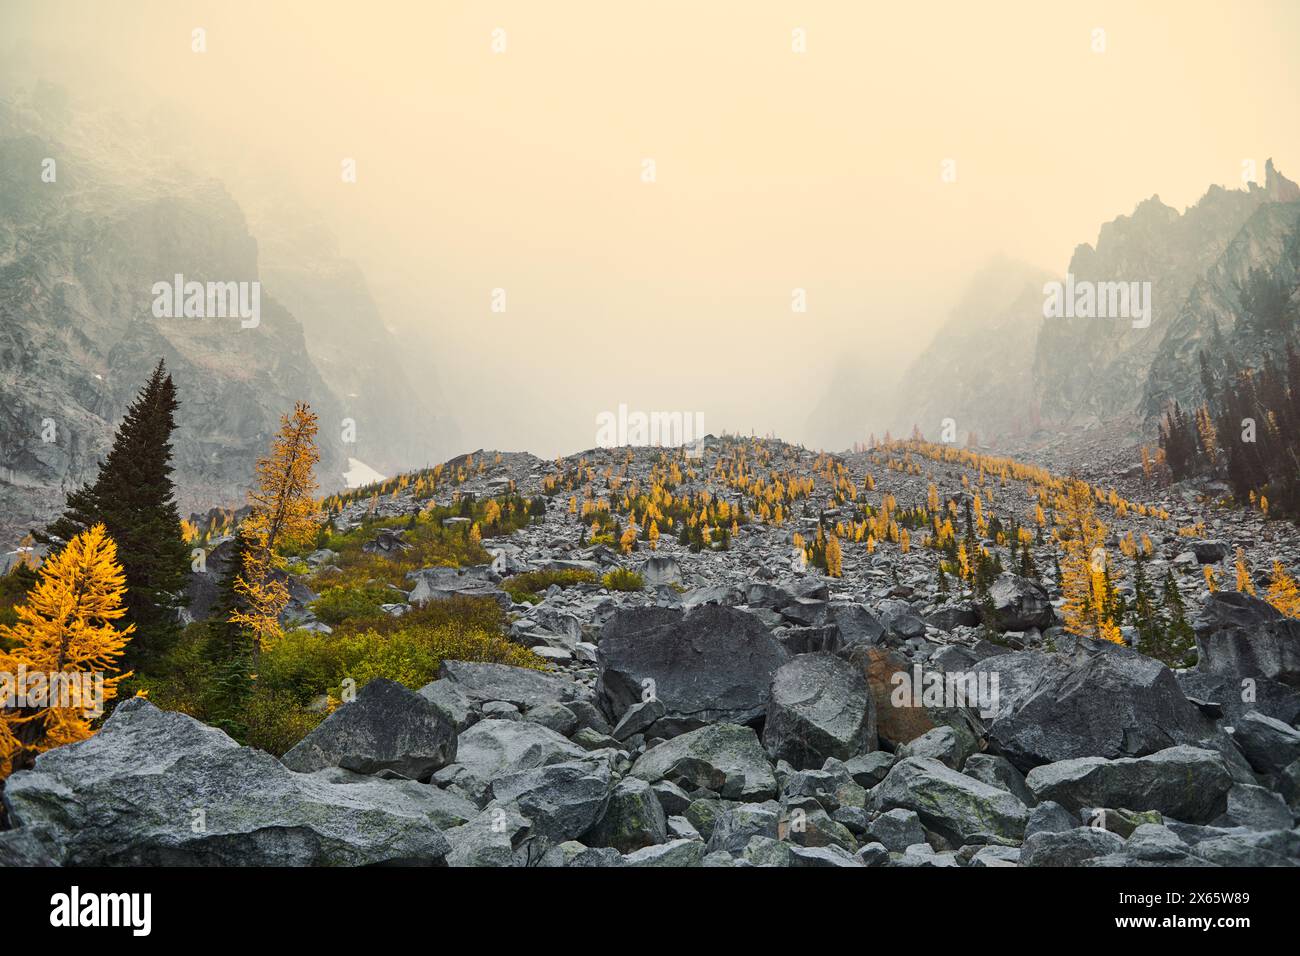 Larches show off their brilliant yellow needles in autumn in the Stock Photo